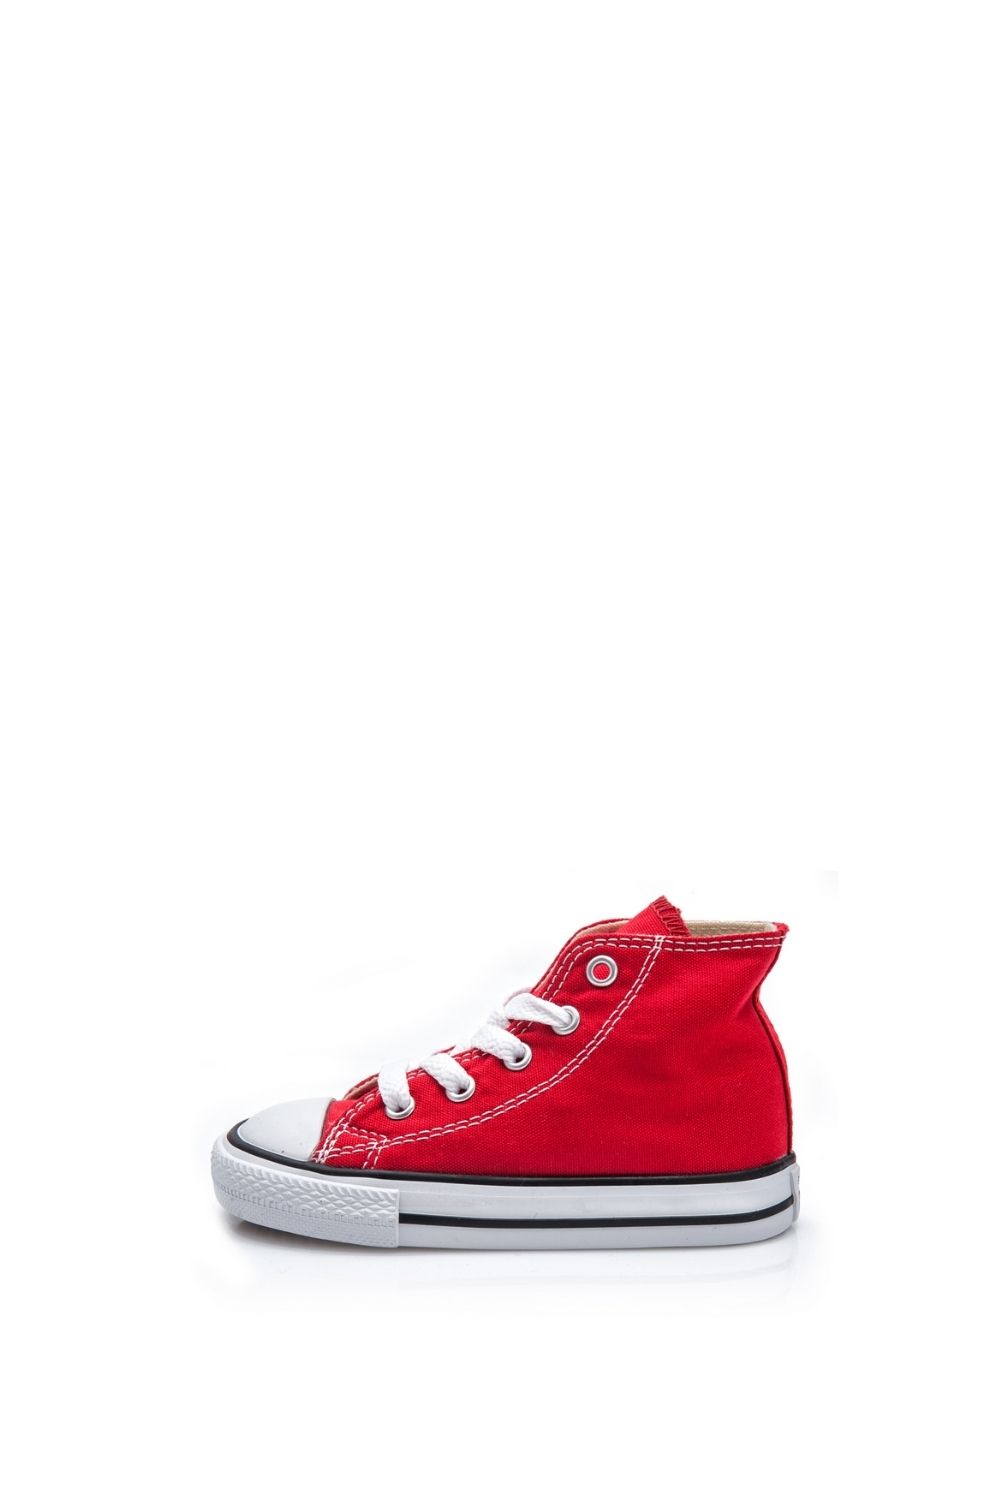 CONVERSE - Βρεφικά μποτάκια Chuck Taylor κόκκινα Παιδικά/Baby/Παπούτσια/Sneakers